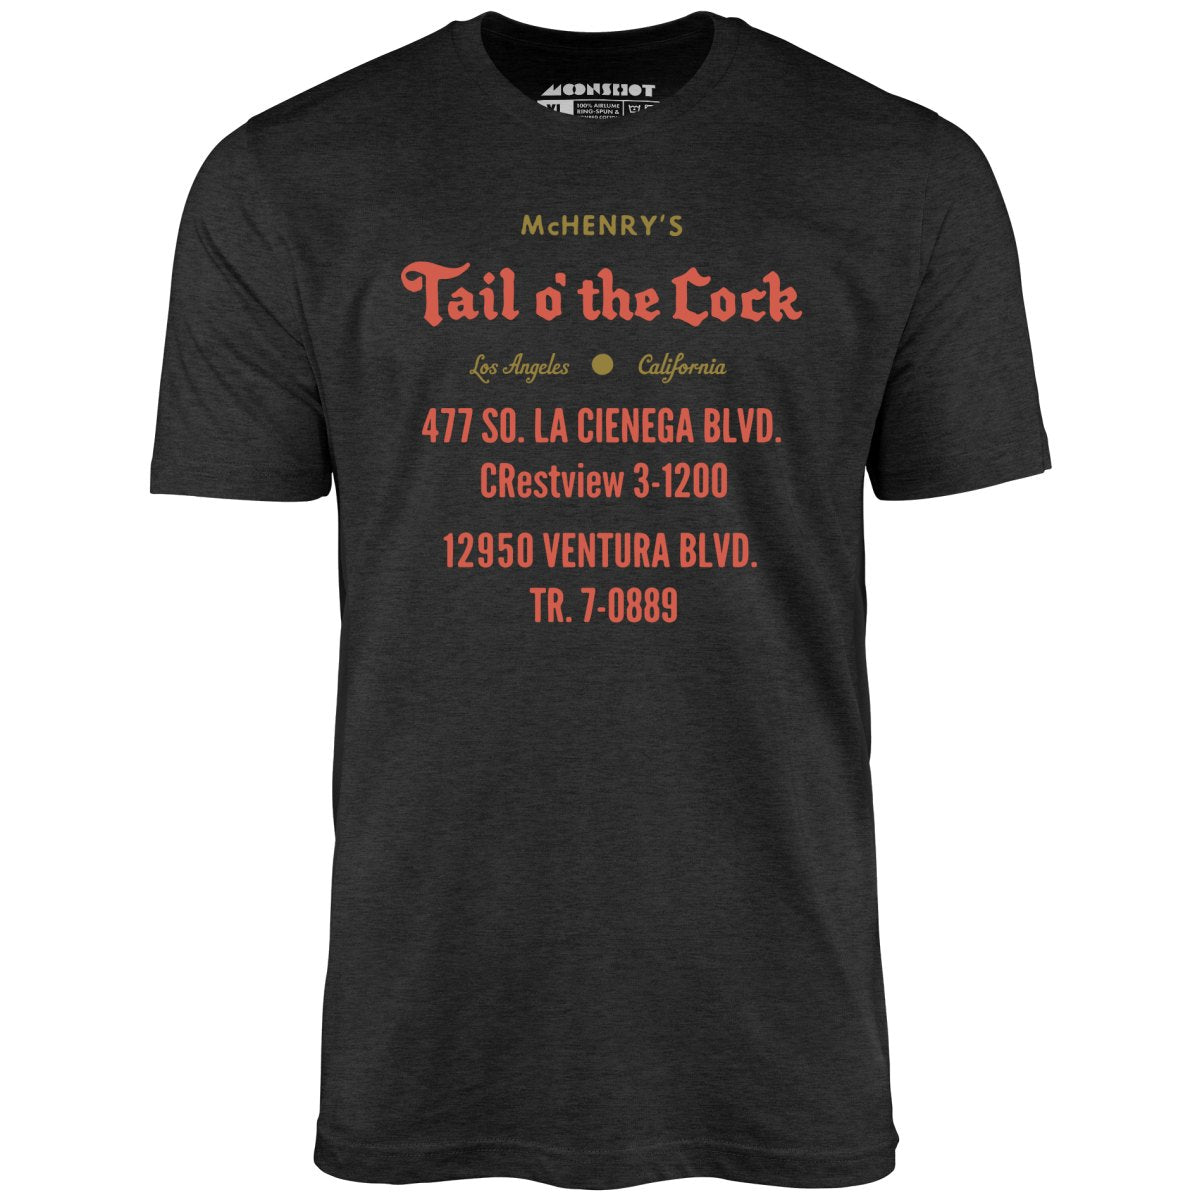 McHenry's Tail o' the Cock - Los Angeles, CA - Vintage Restaurant - Unisex T-Shirt